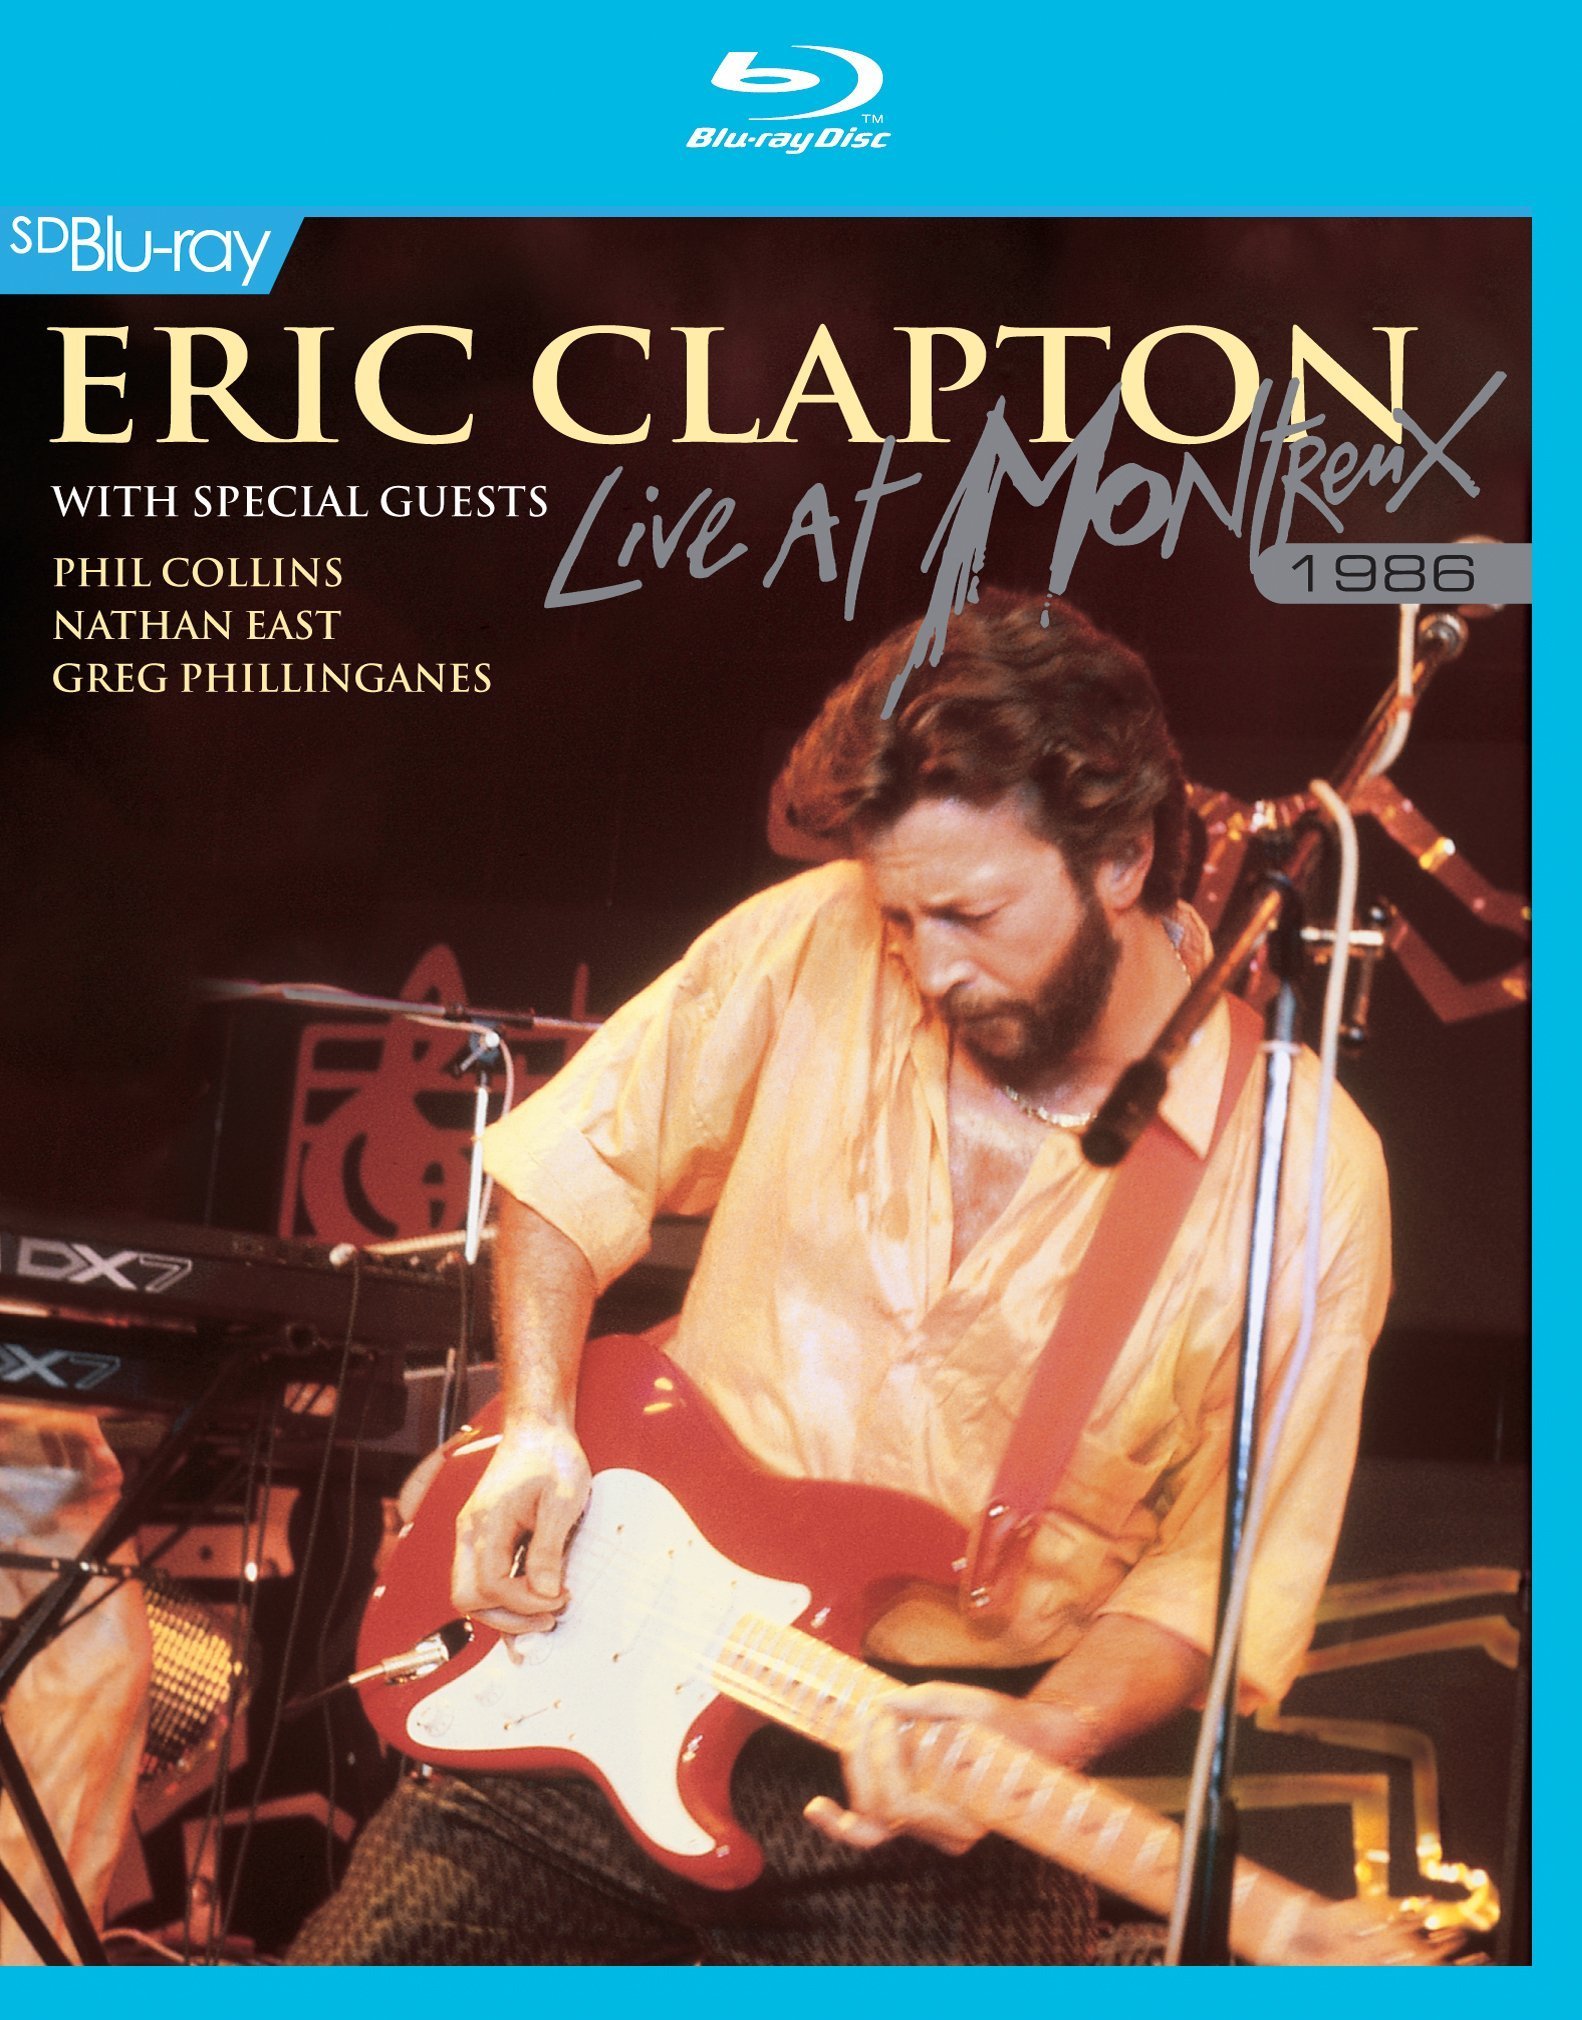 Eric Clapton: Live at Montreux 1986 Blu-ray (SD Blu-ray) (United 